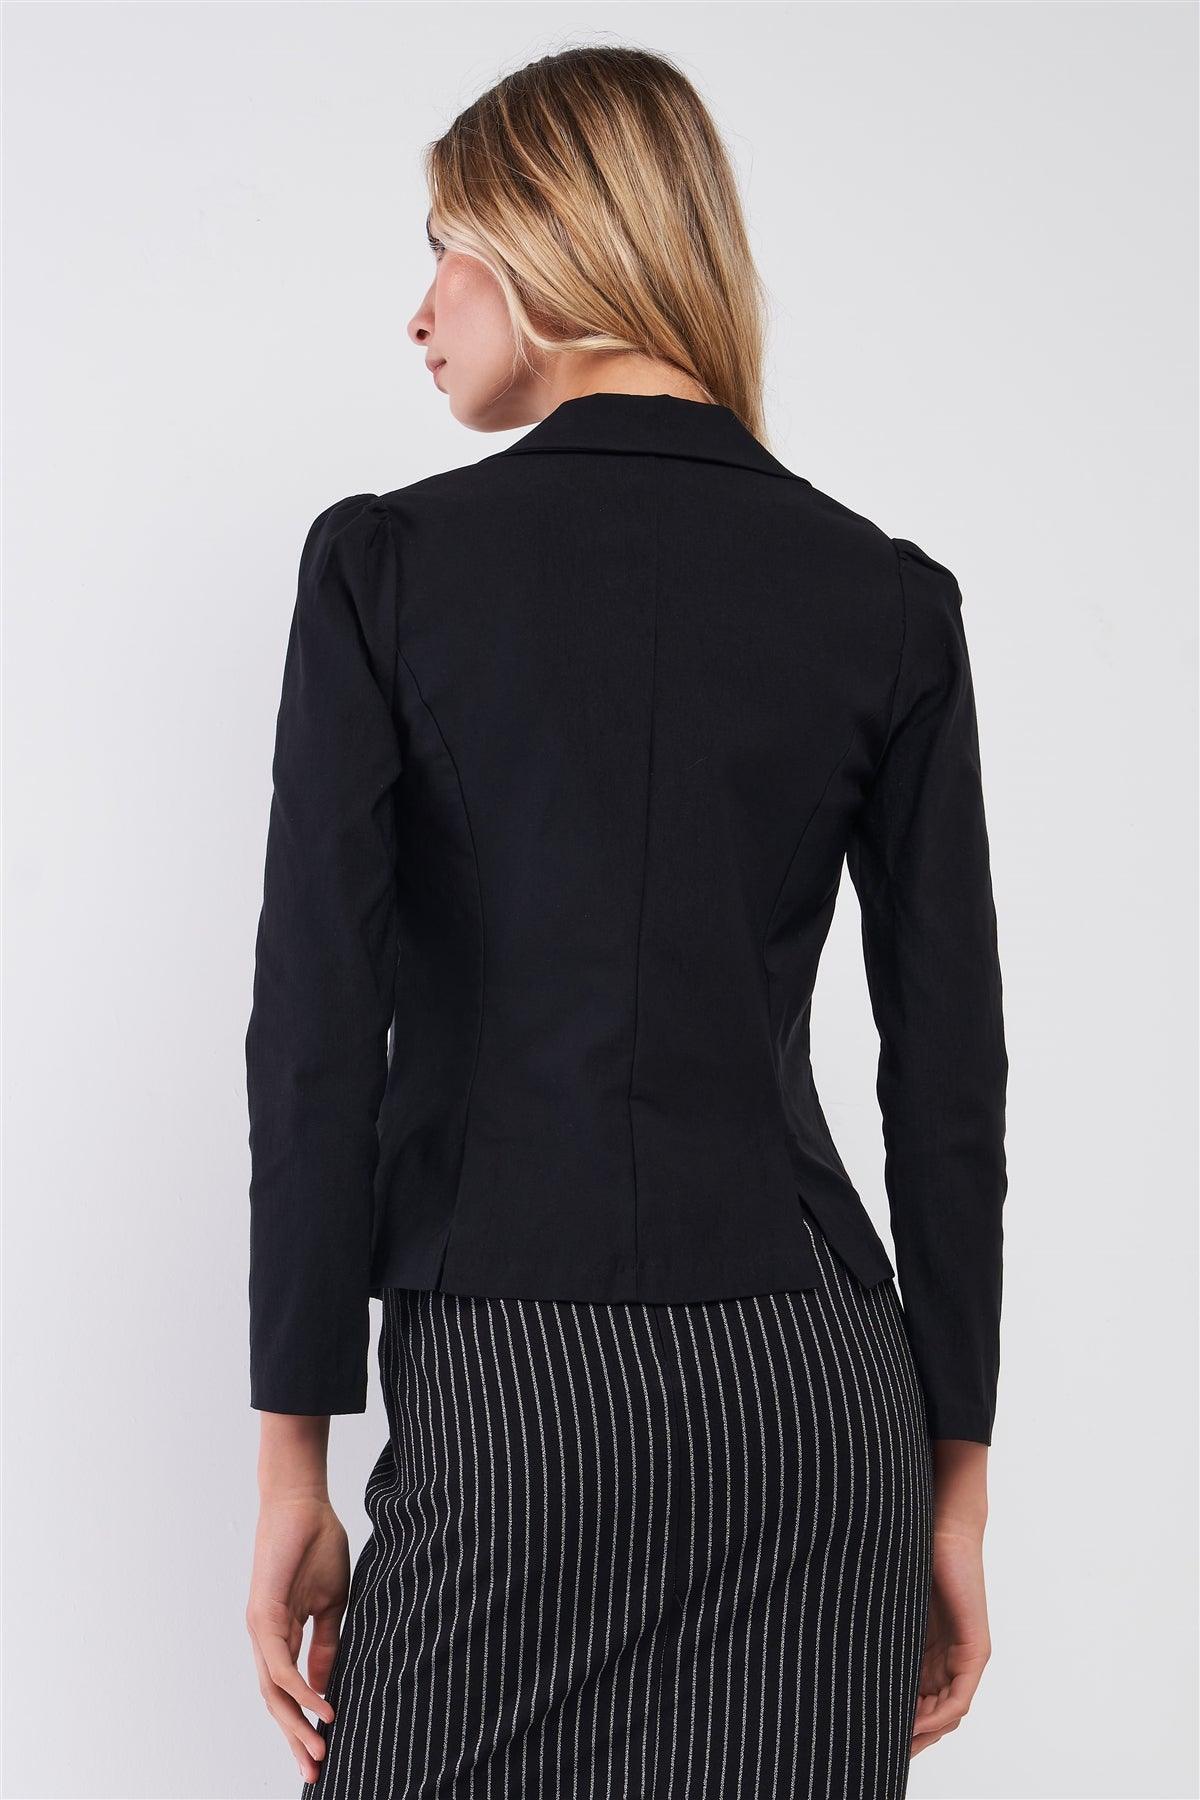 Strict Black Lapeled Collar Fitted Single-Breasted Blazer /1-2-2-2